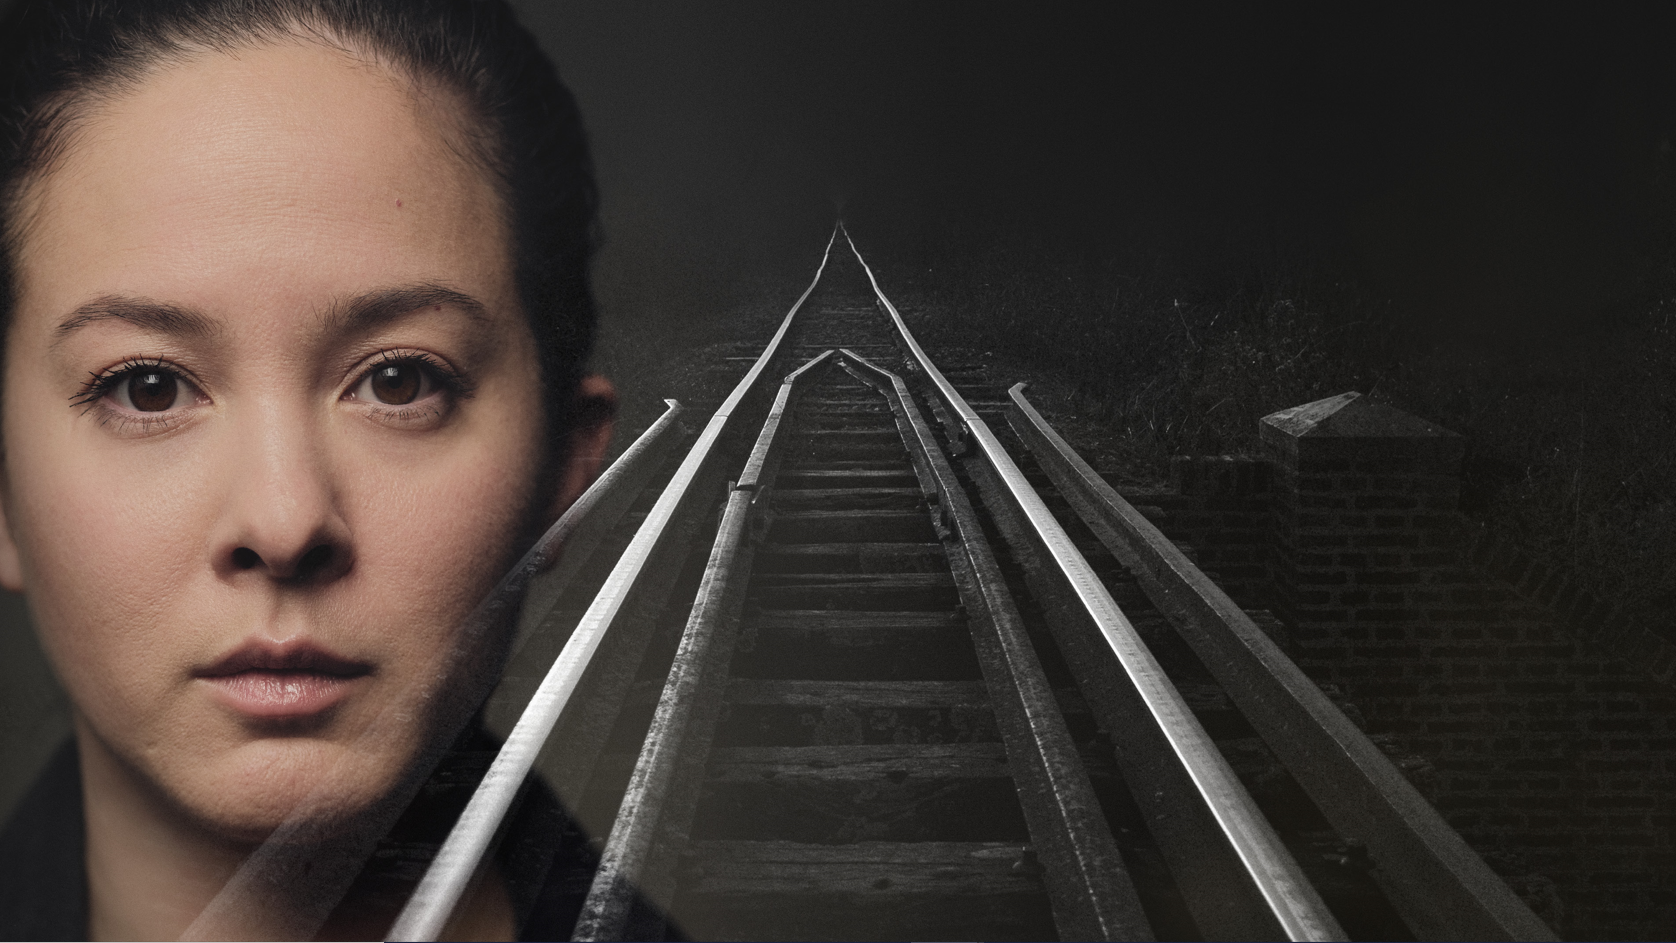 A face of a woman next to a train track